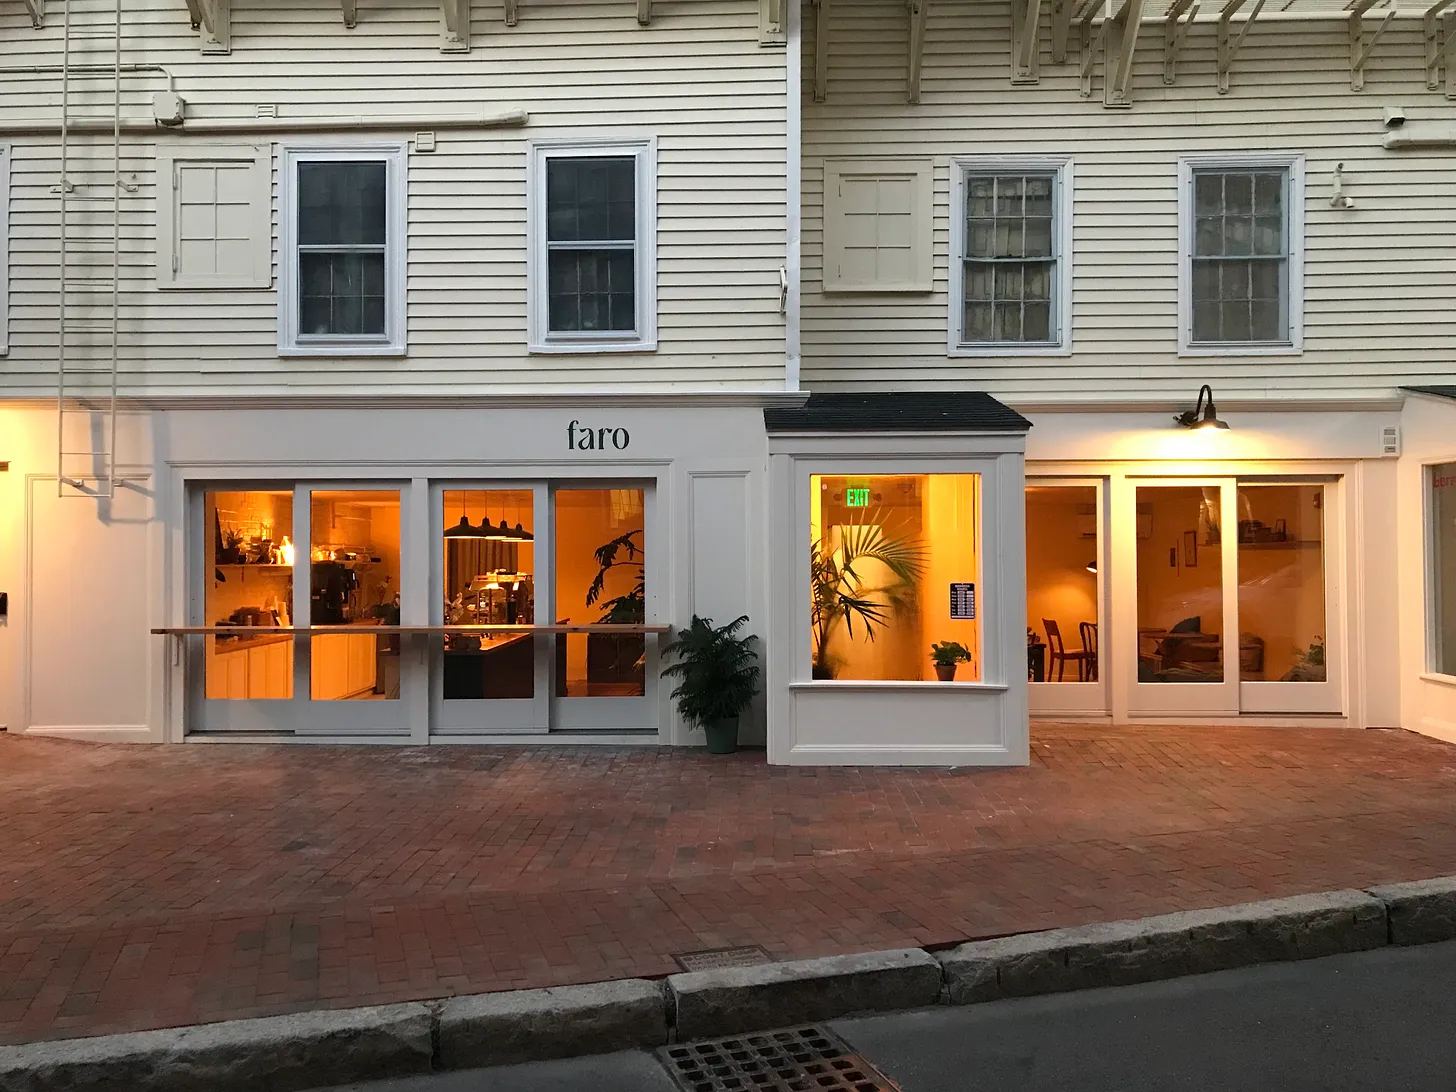 A warmly lit café front with large windows on a traditional two-story building, featuring a clean, modern design and the name 'faro' above the windows. The exterior is painted white with a brick pavement, and it's twilight outside.